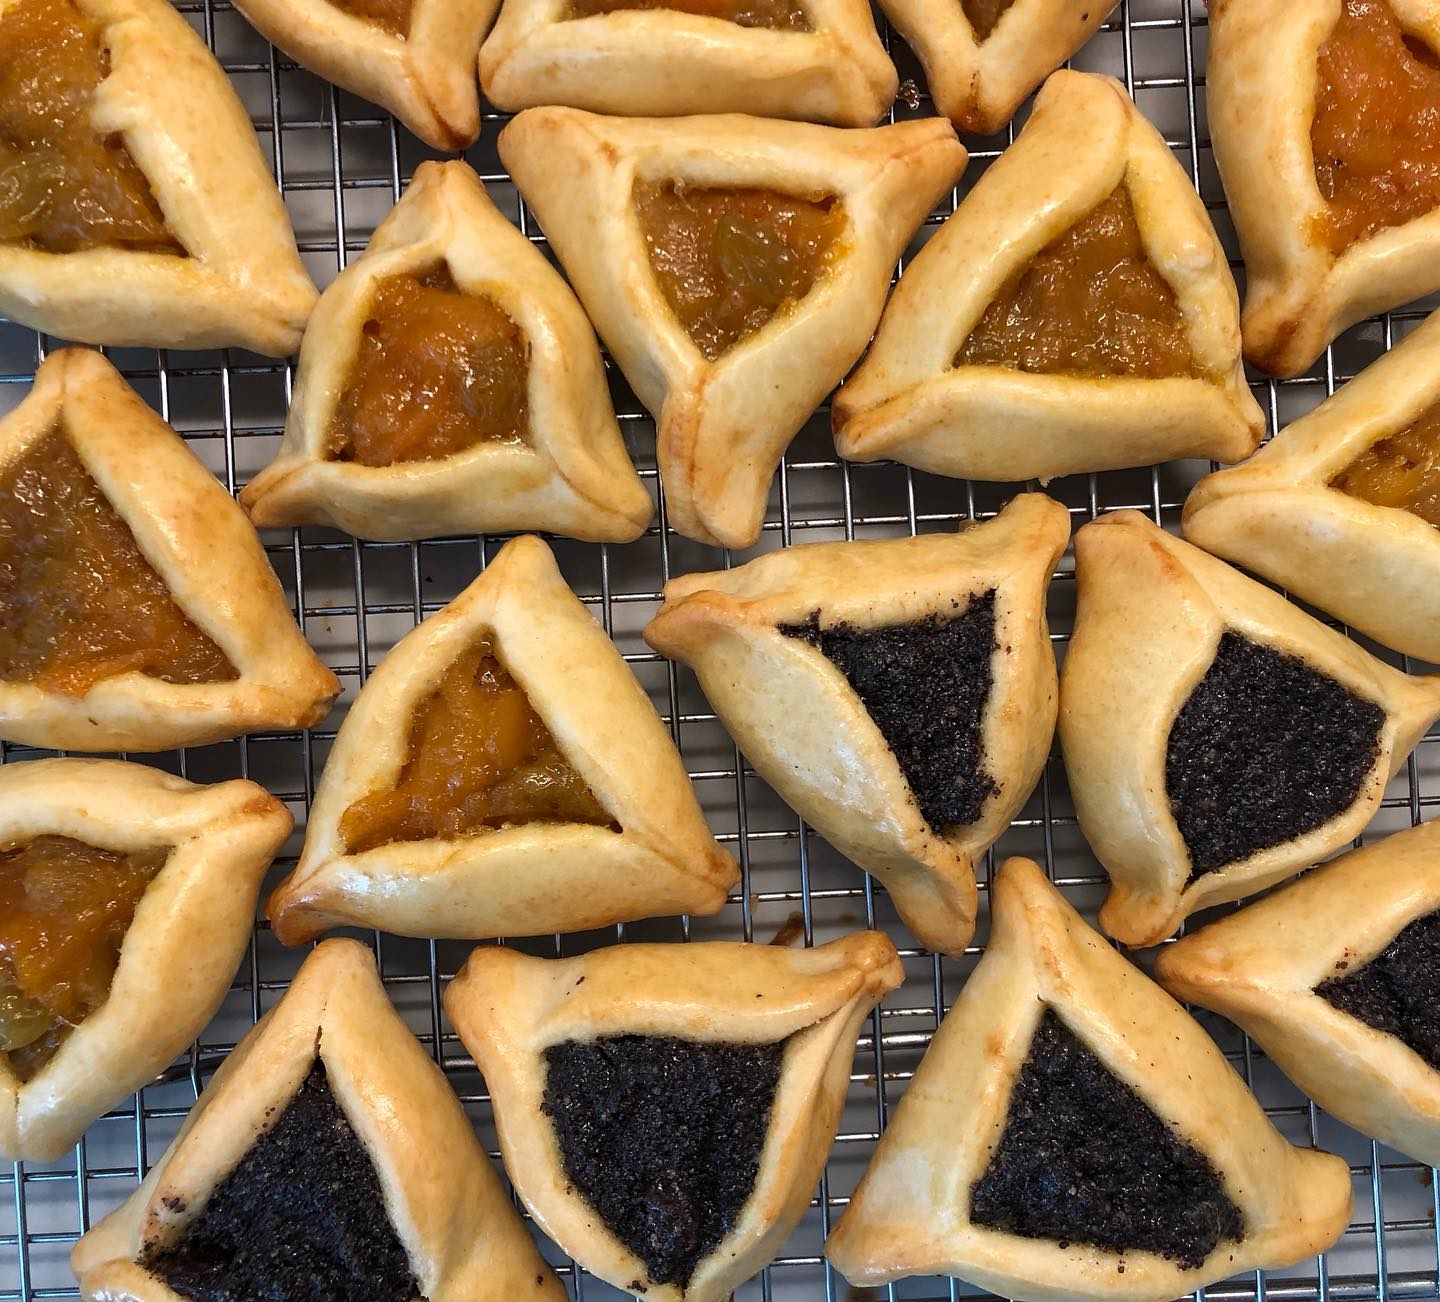 First attempt at hamantaschen, from the old family recipe. Total taste memory.